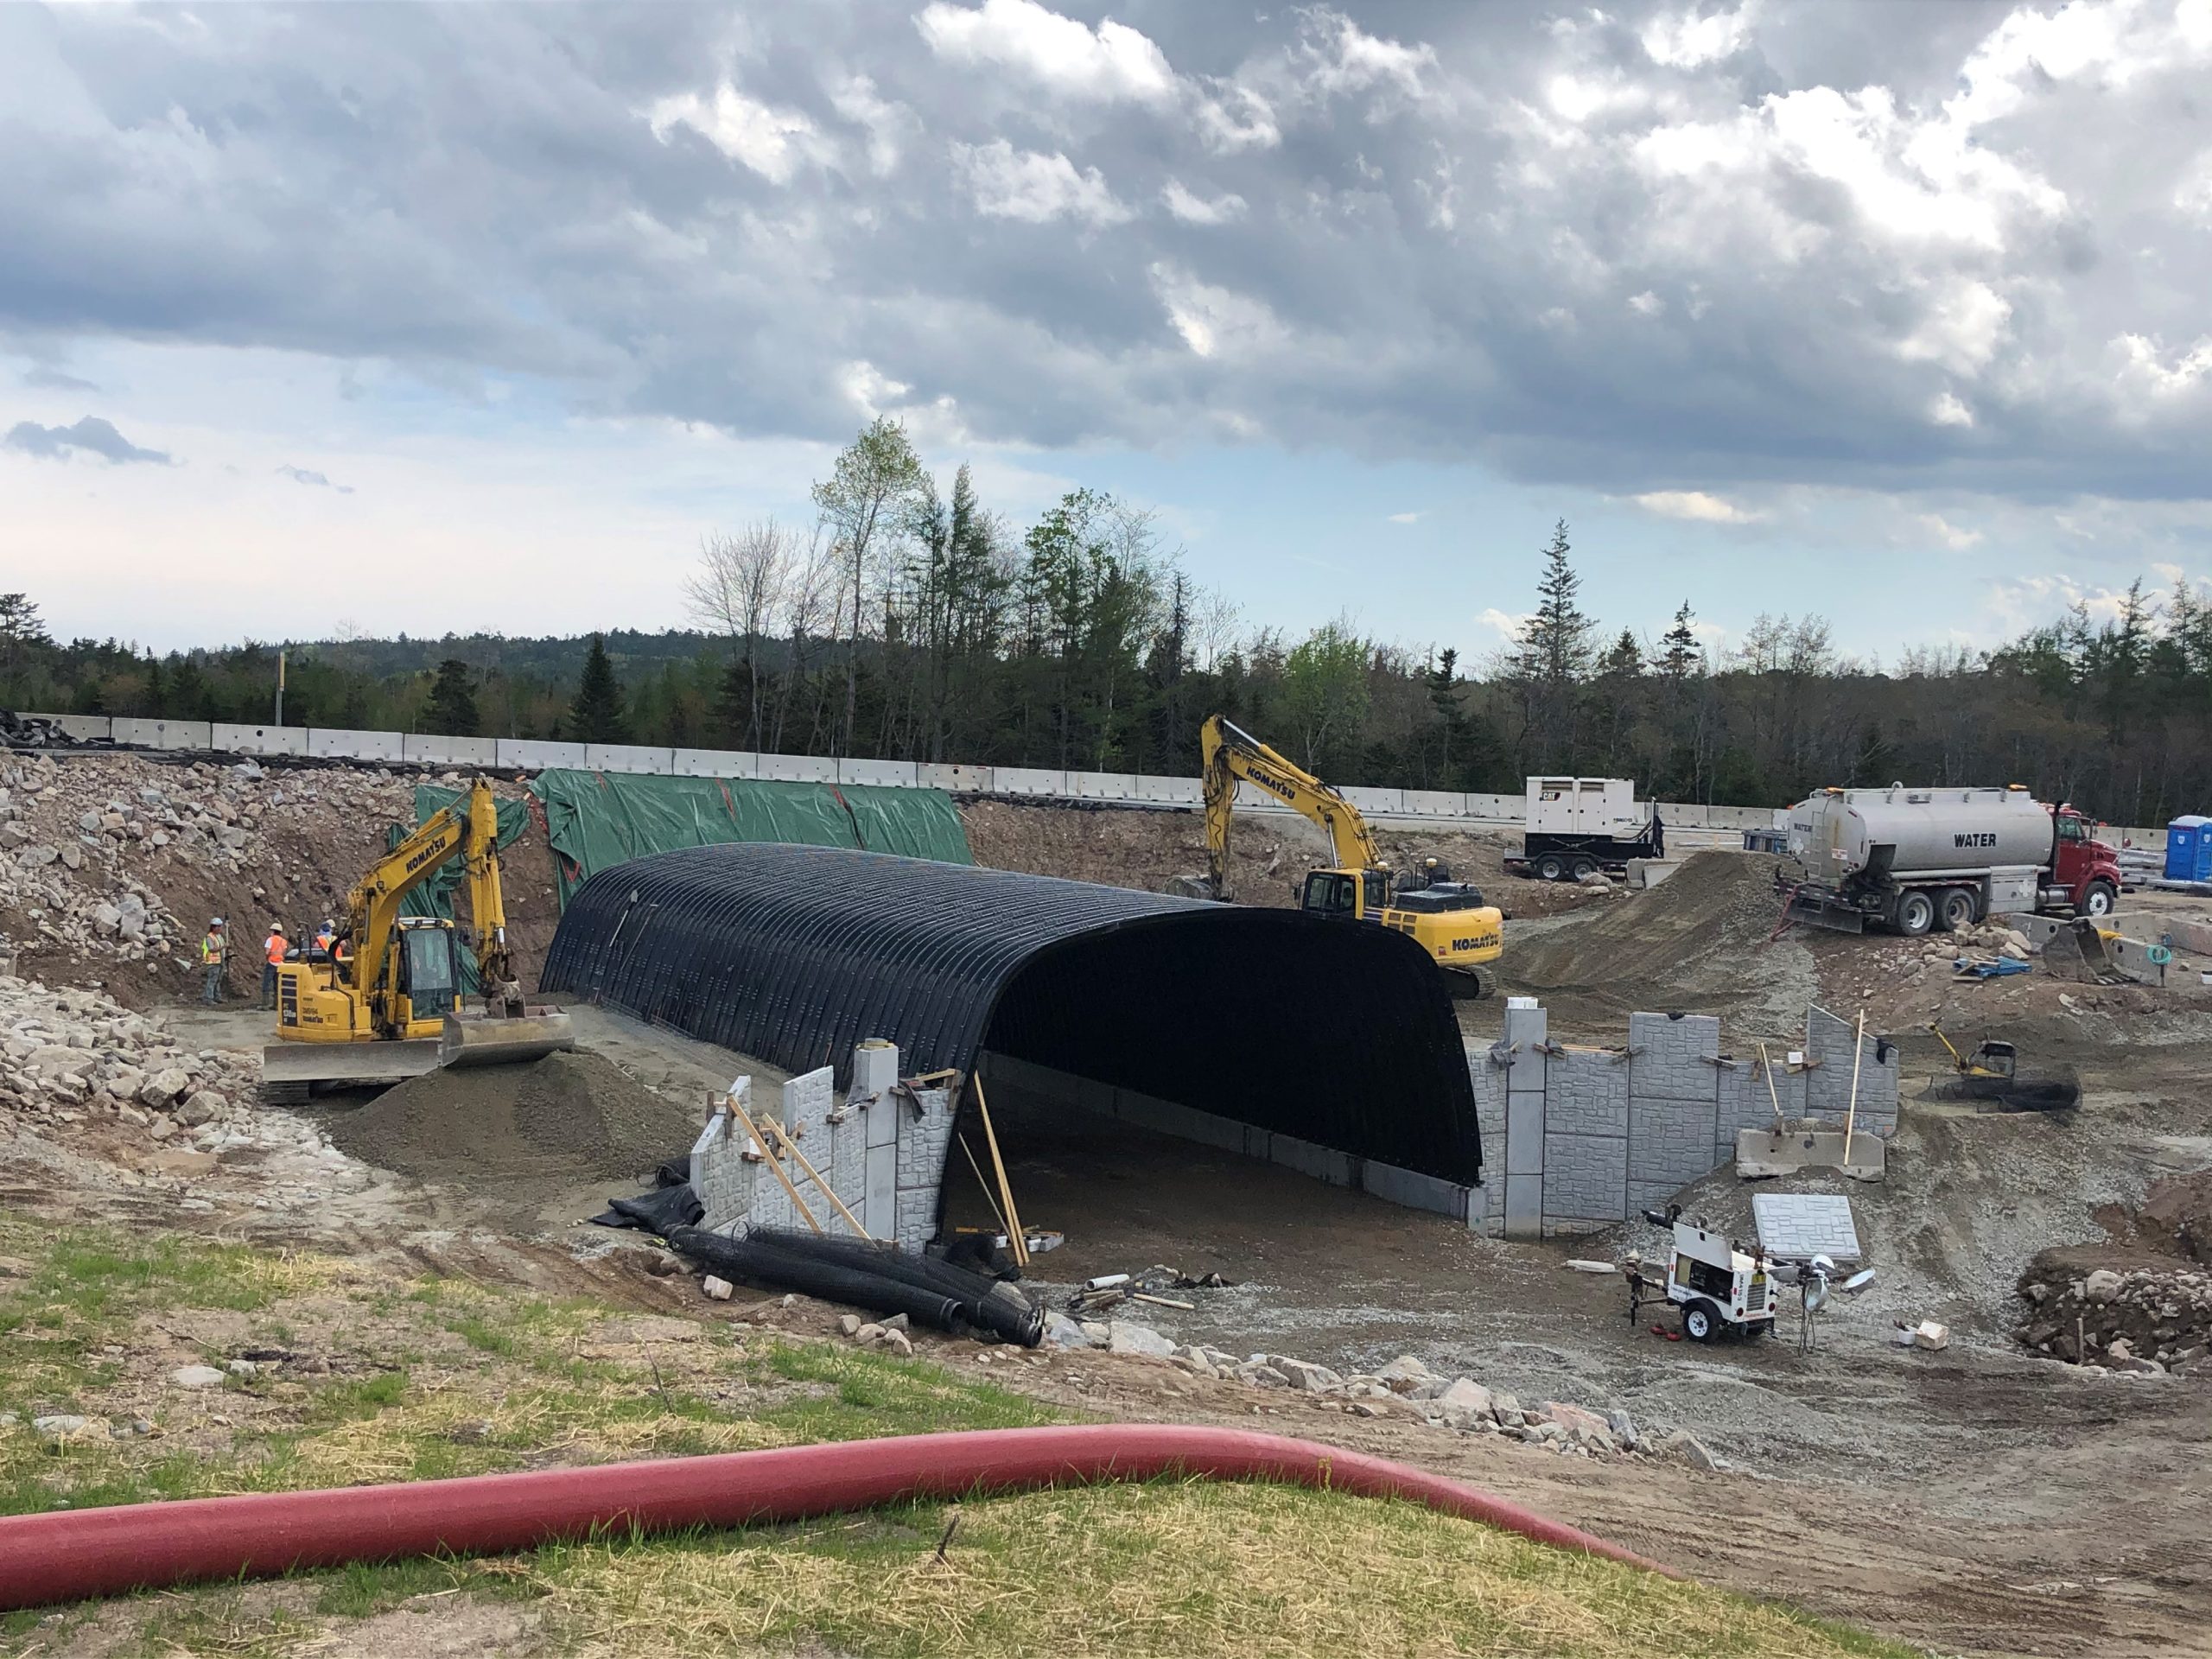 SITE SCOTIA Hwy 103 Ingramport to Hubbards – Vinegar Lake Rd Overpass Westbound (Fall 2021)